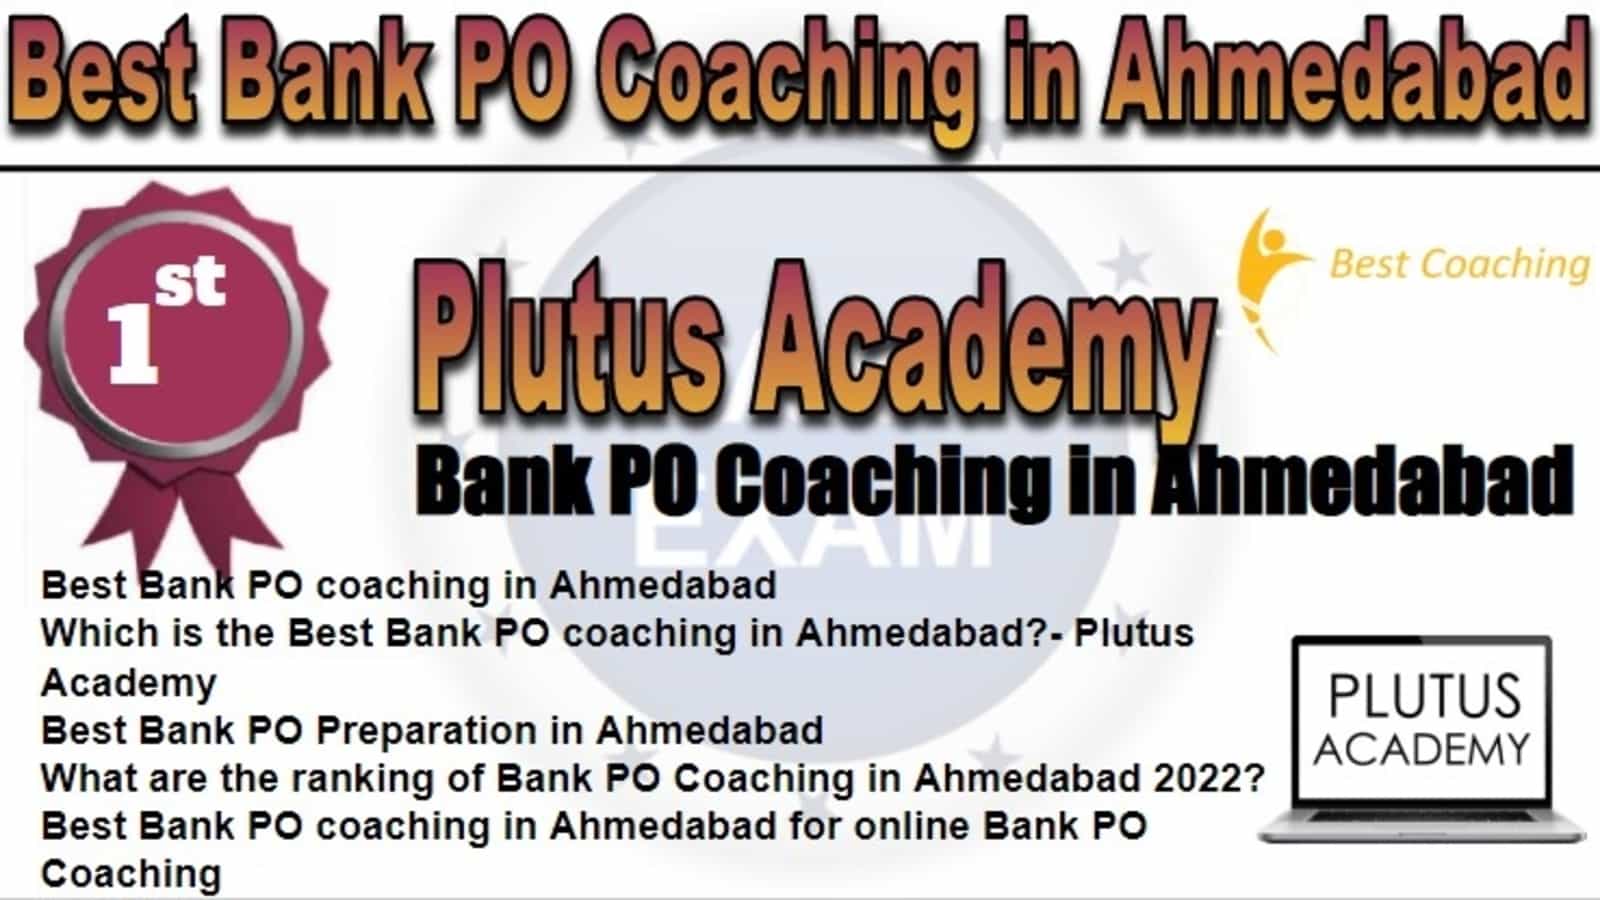 Rank 1 Best Bank PO Coaching in Ahmedabad